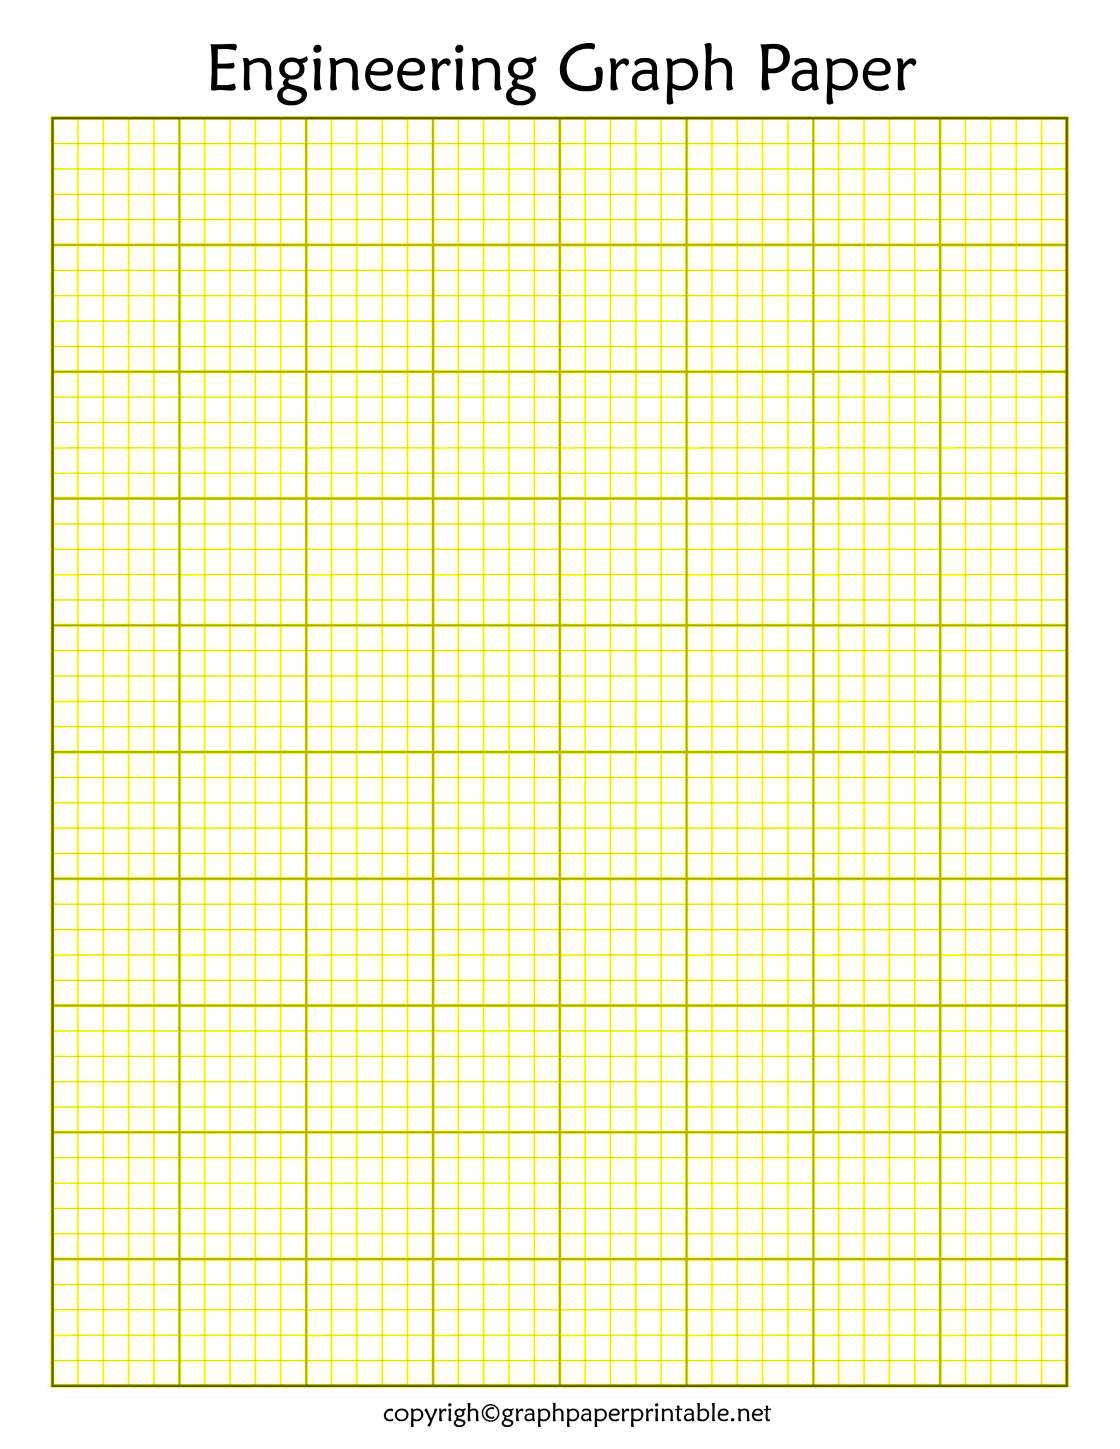 Free Engineering Graph Paper